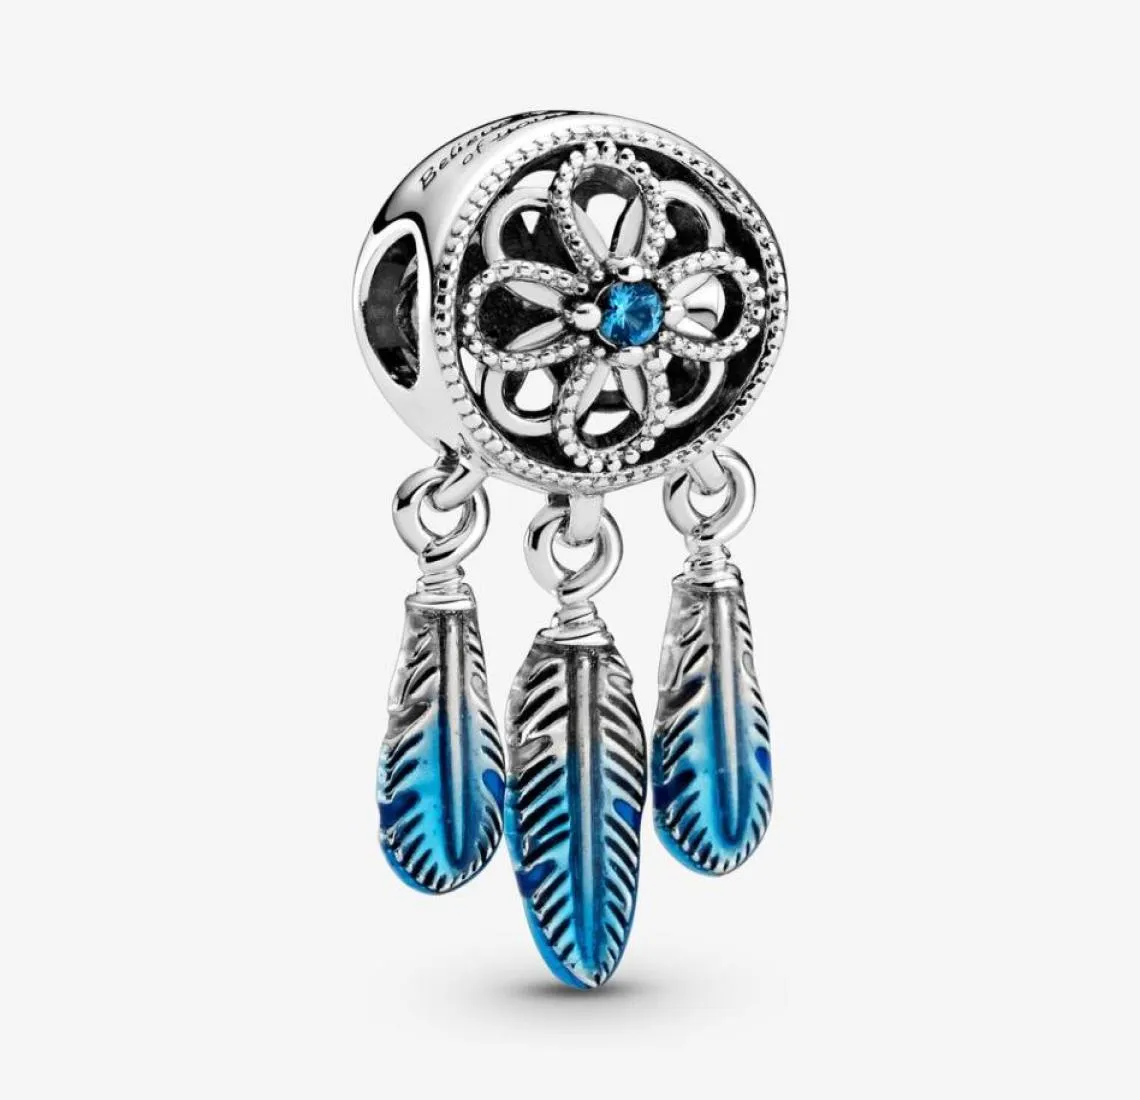 2021 Spring Collection 925 Sterling Silver Jewelry Beads Blue Dreamcatcher Charms 799341C01 Fit European Style Armband Necklace4628078